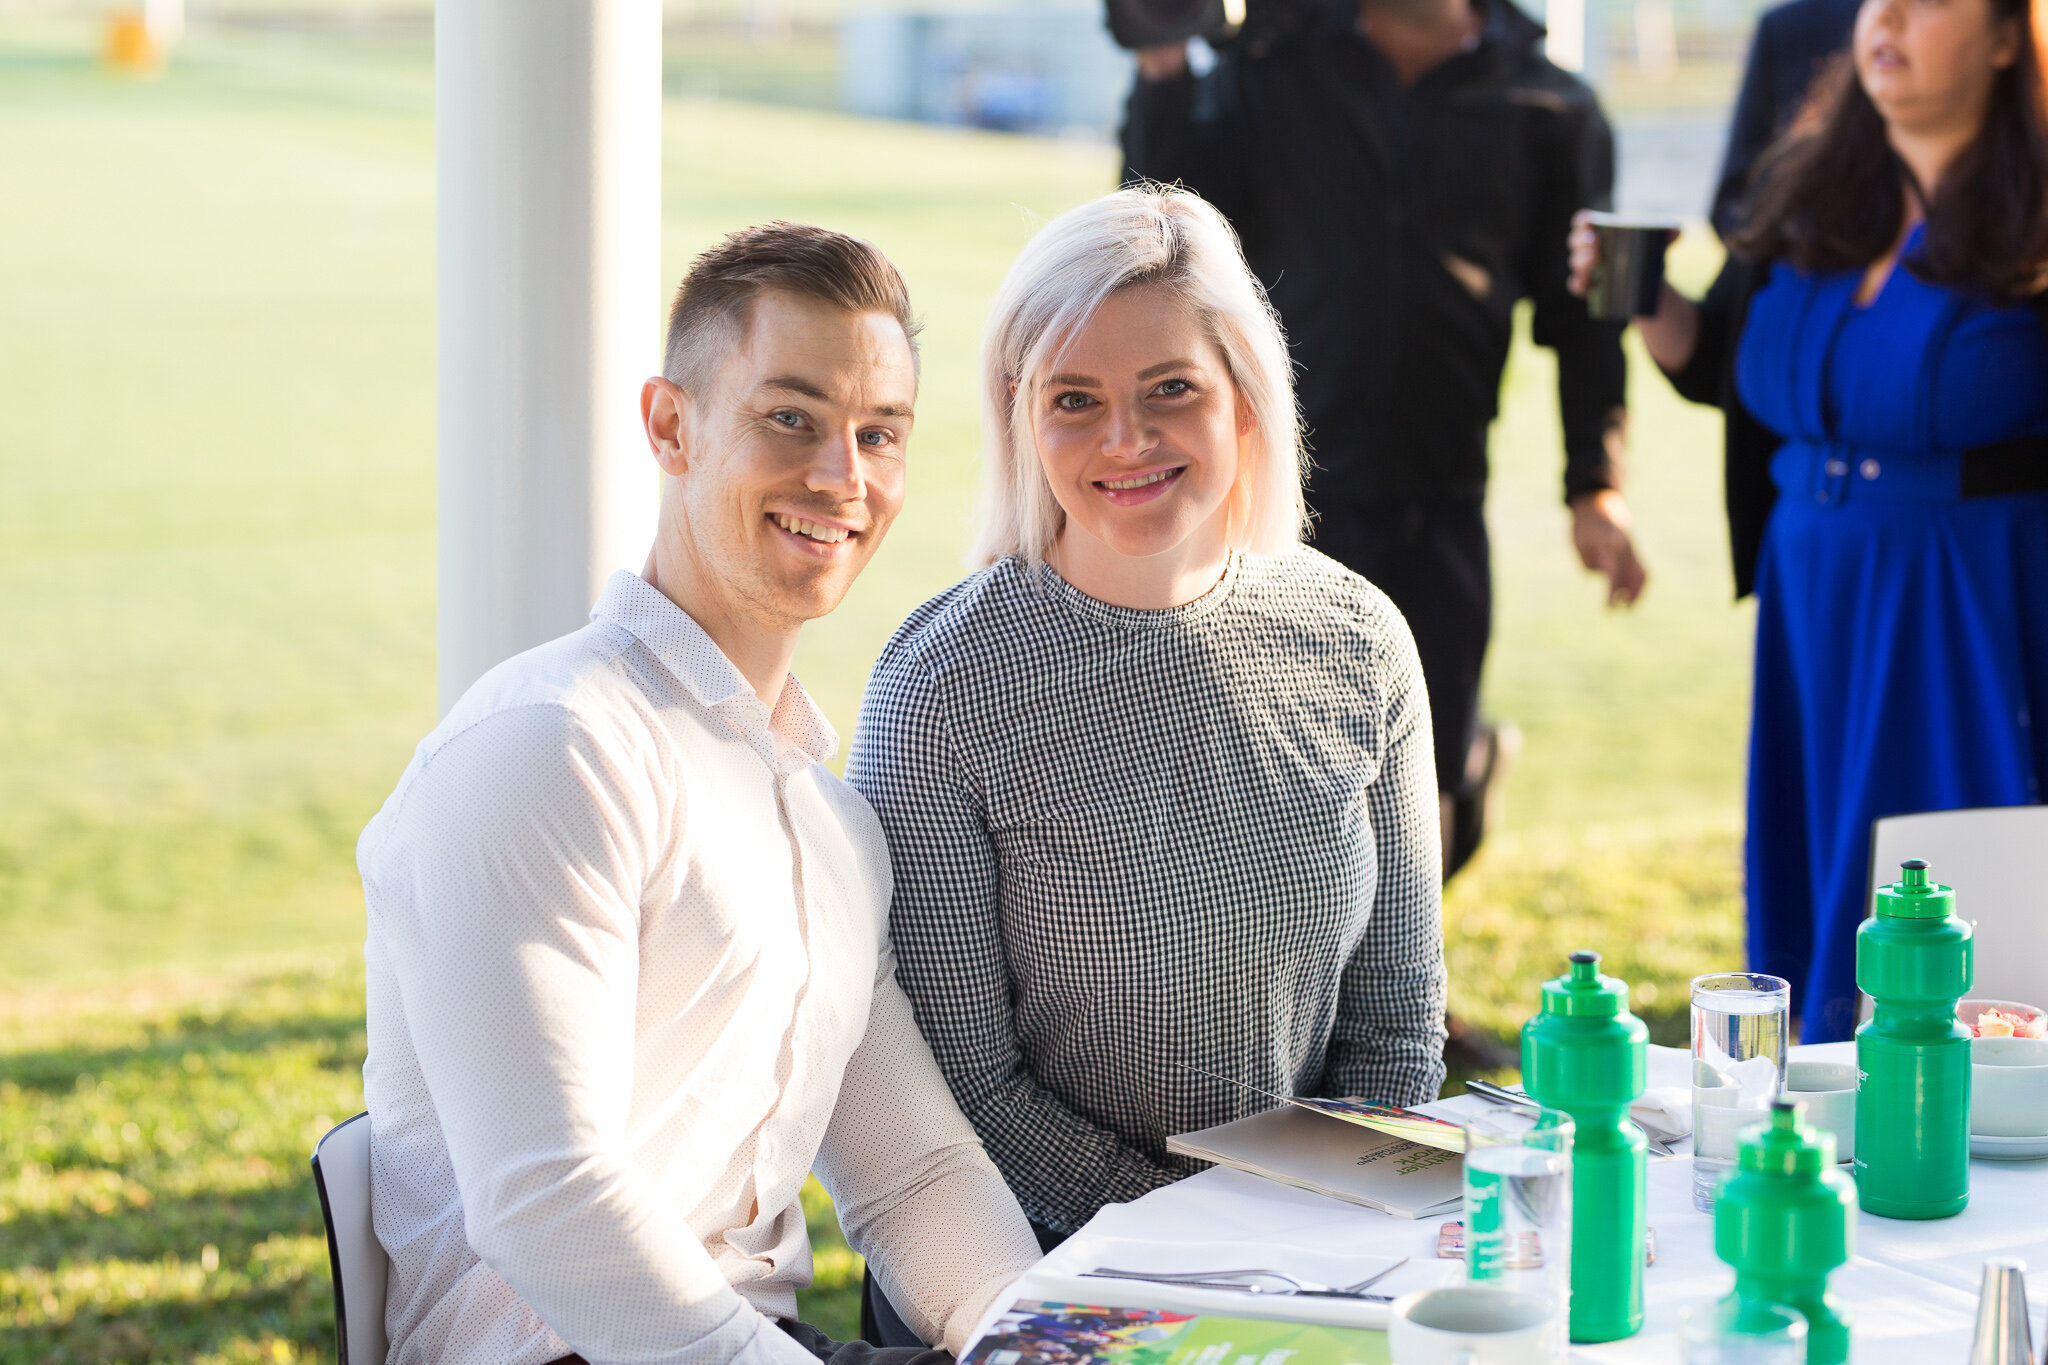 Canberra Event Photographer - Man and woman smile at camera in bright sunlight